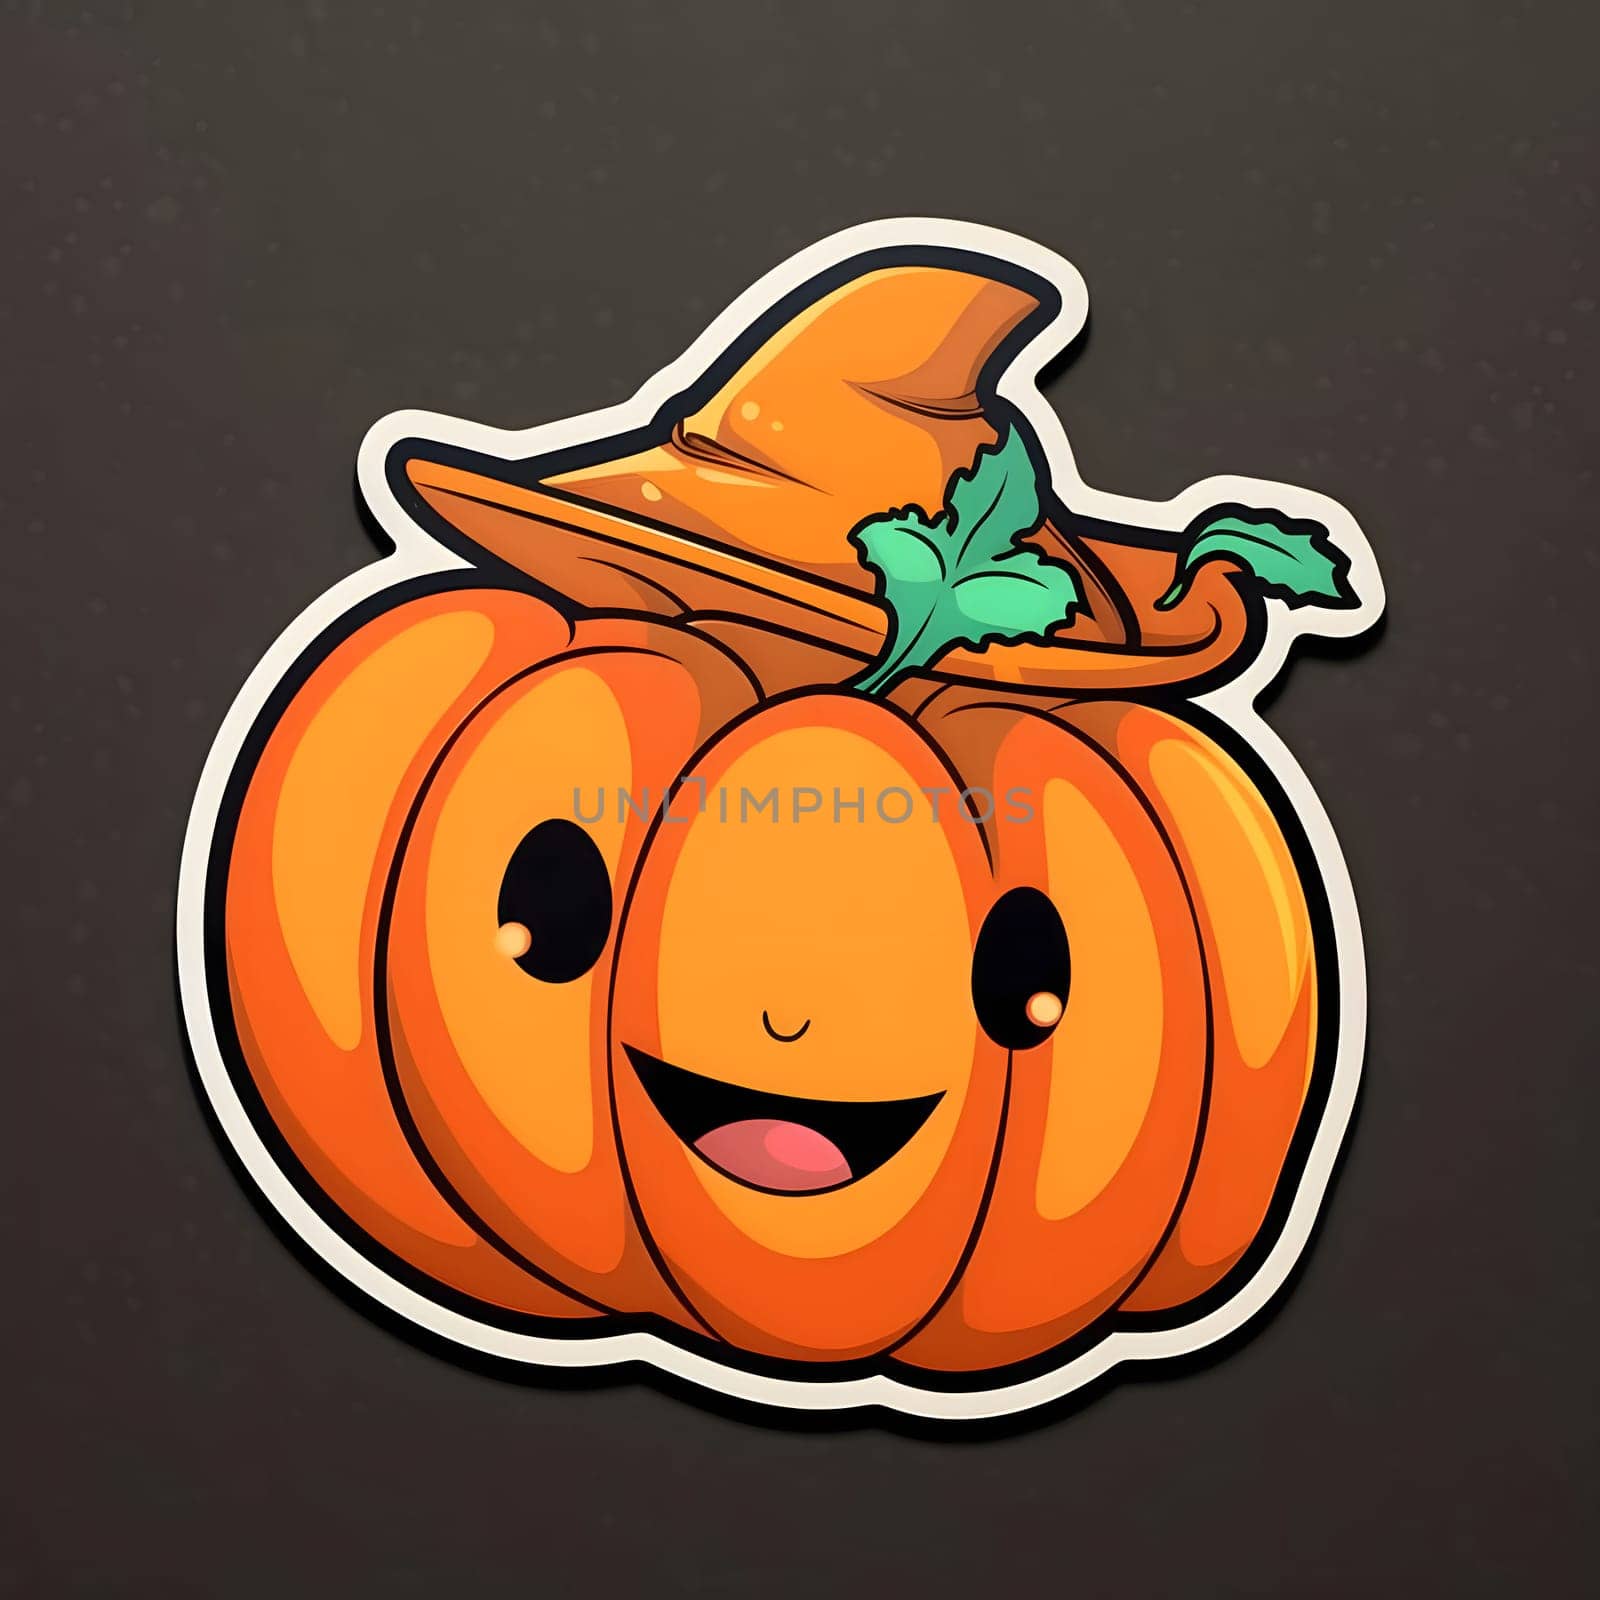 Sticker happy smiling jack-o-lantern pumpkin with hat, Halloween image on a dark isolated background. Atmosphere of darkness and fear.